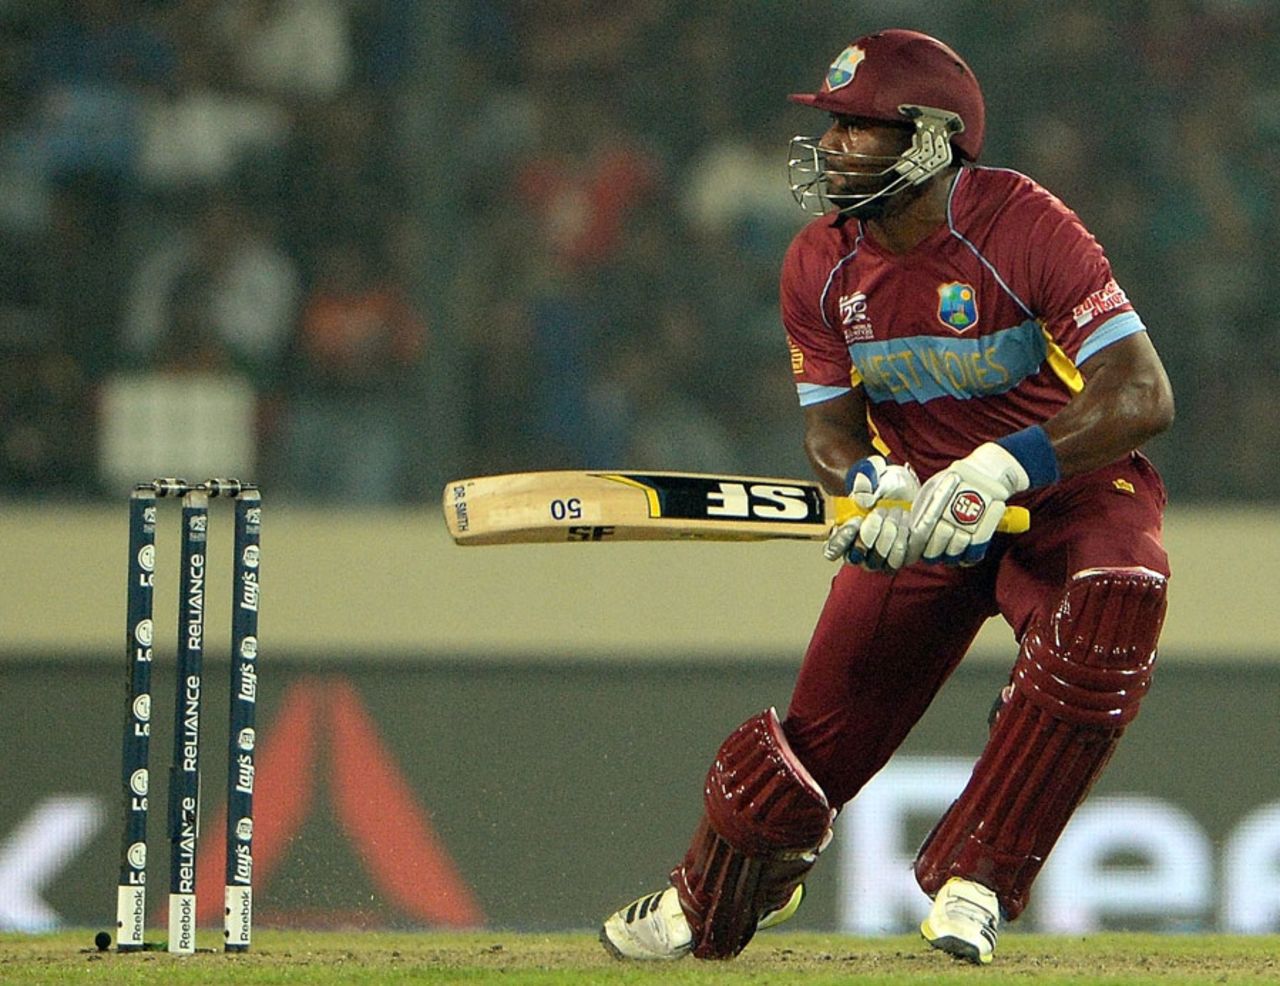 Dwayne Smith uses innovation to find a boundary, Bangladesh v West Indies, World T20, Group 2, Mirpur, March 25, 2014